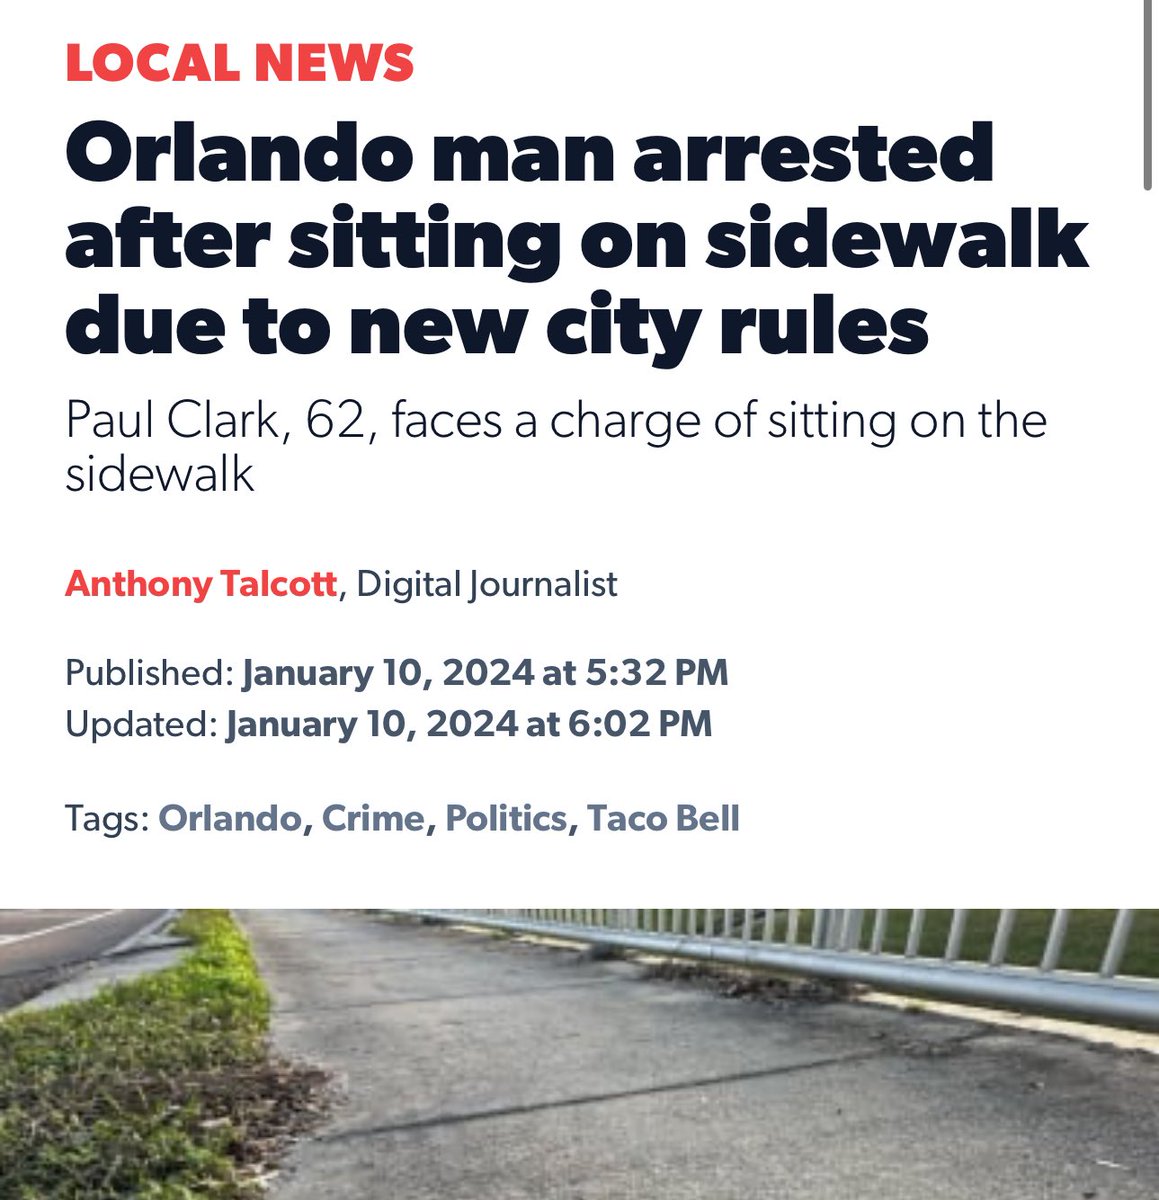 One of the arguments made in favor of this ordinance by the City of Orlando was that it had nothing to do with the homeless — and yet, the first person OPD arrested for sitting on the sidewalk is an individual without a home. Ridiculous. Living in poverty should not be a crime.